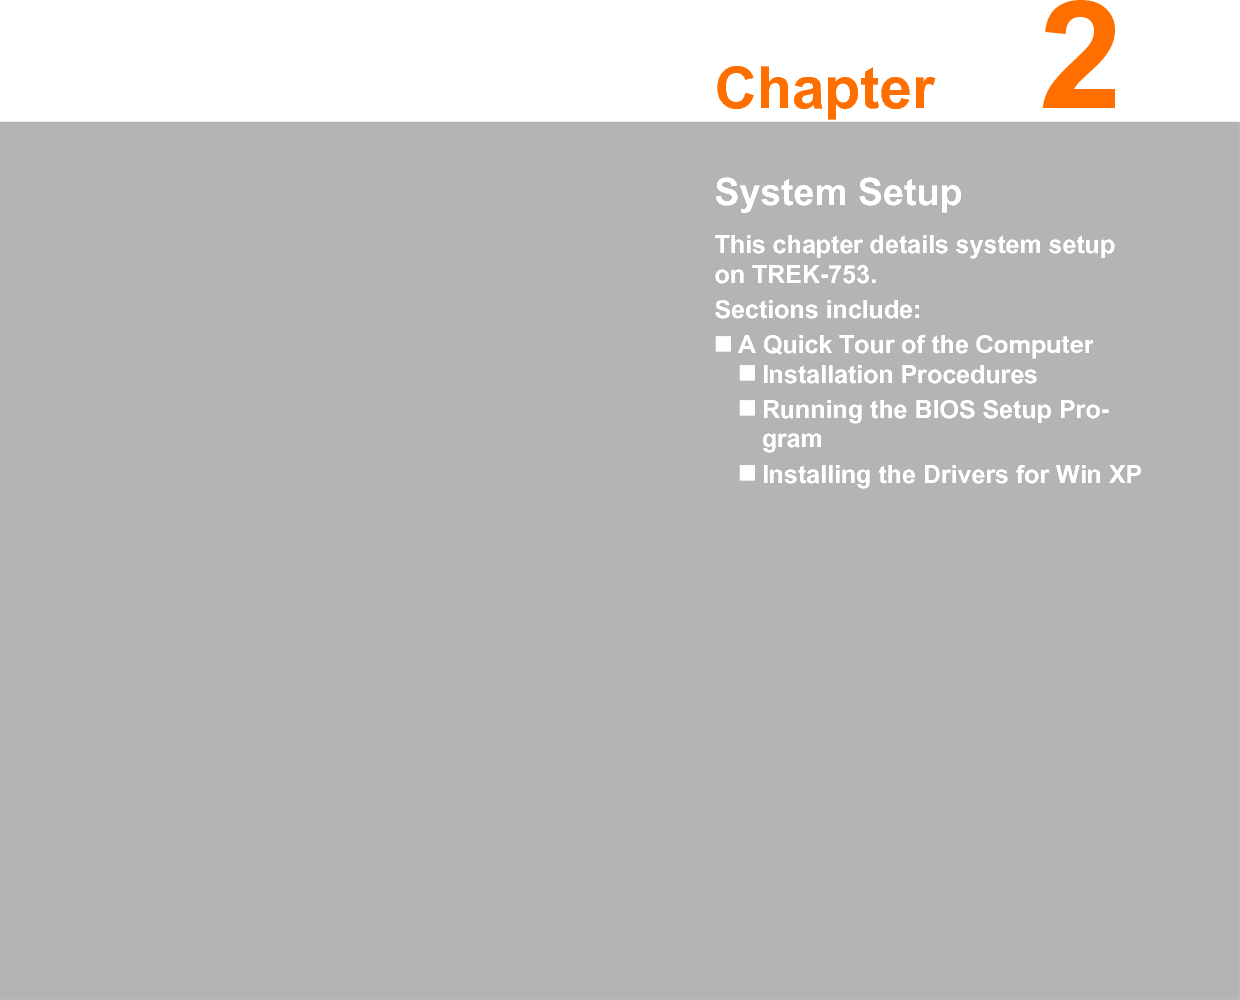 Chapter 22System SetupThis chapter details system setup on TREK-753.Sections include:A Quick Tour of the ComputerInstallation ProceduresRunning the BIOS Setup Pro-gramInstalling the Drivers for Win XP